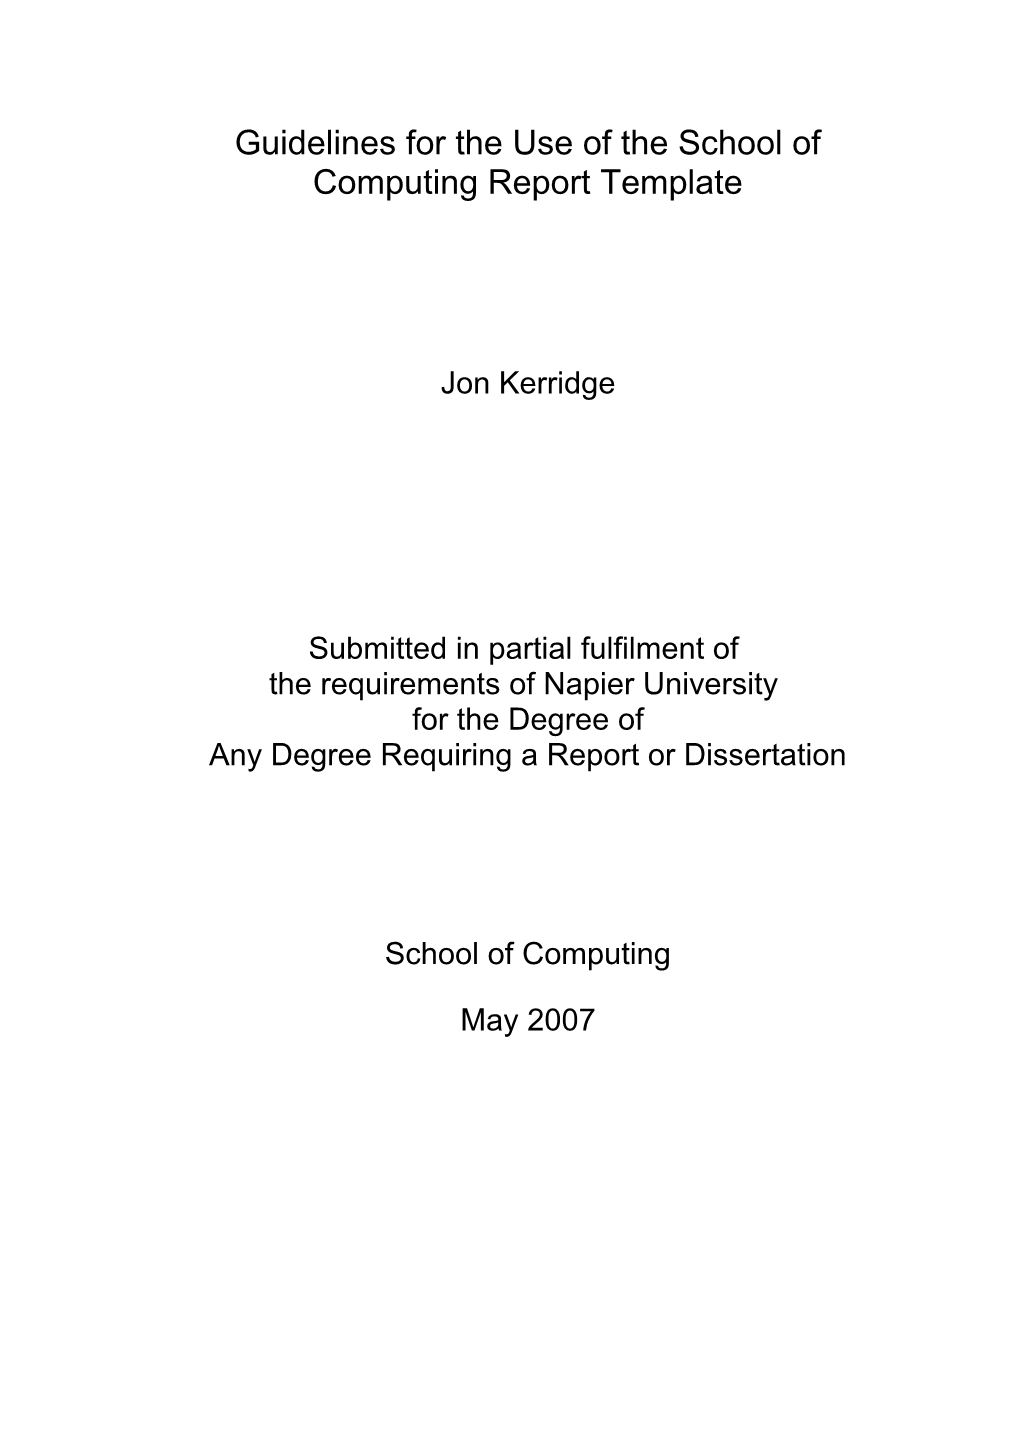 Guidelines for the Use of the School of Computing Report Template